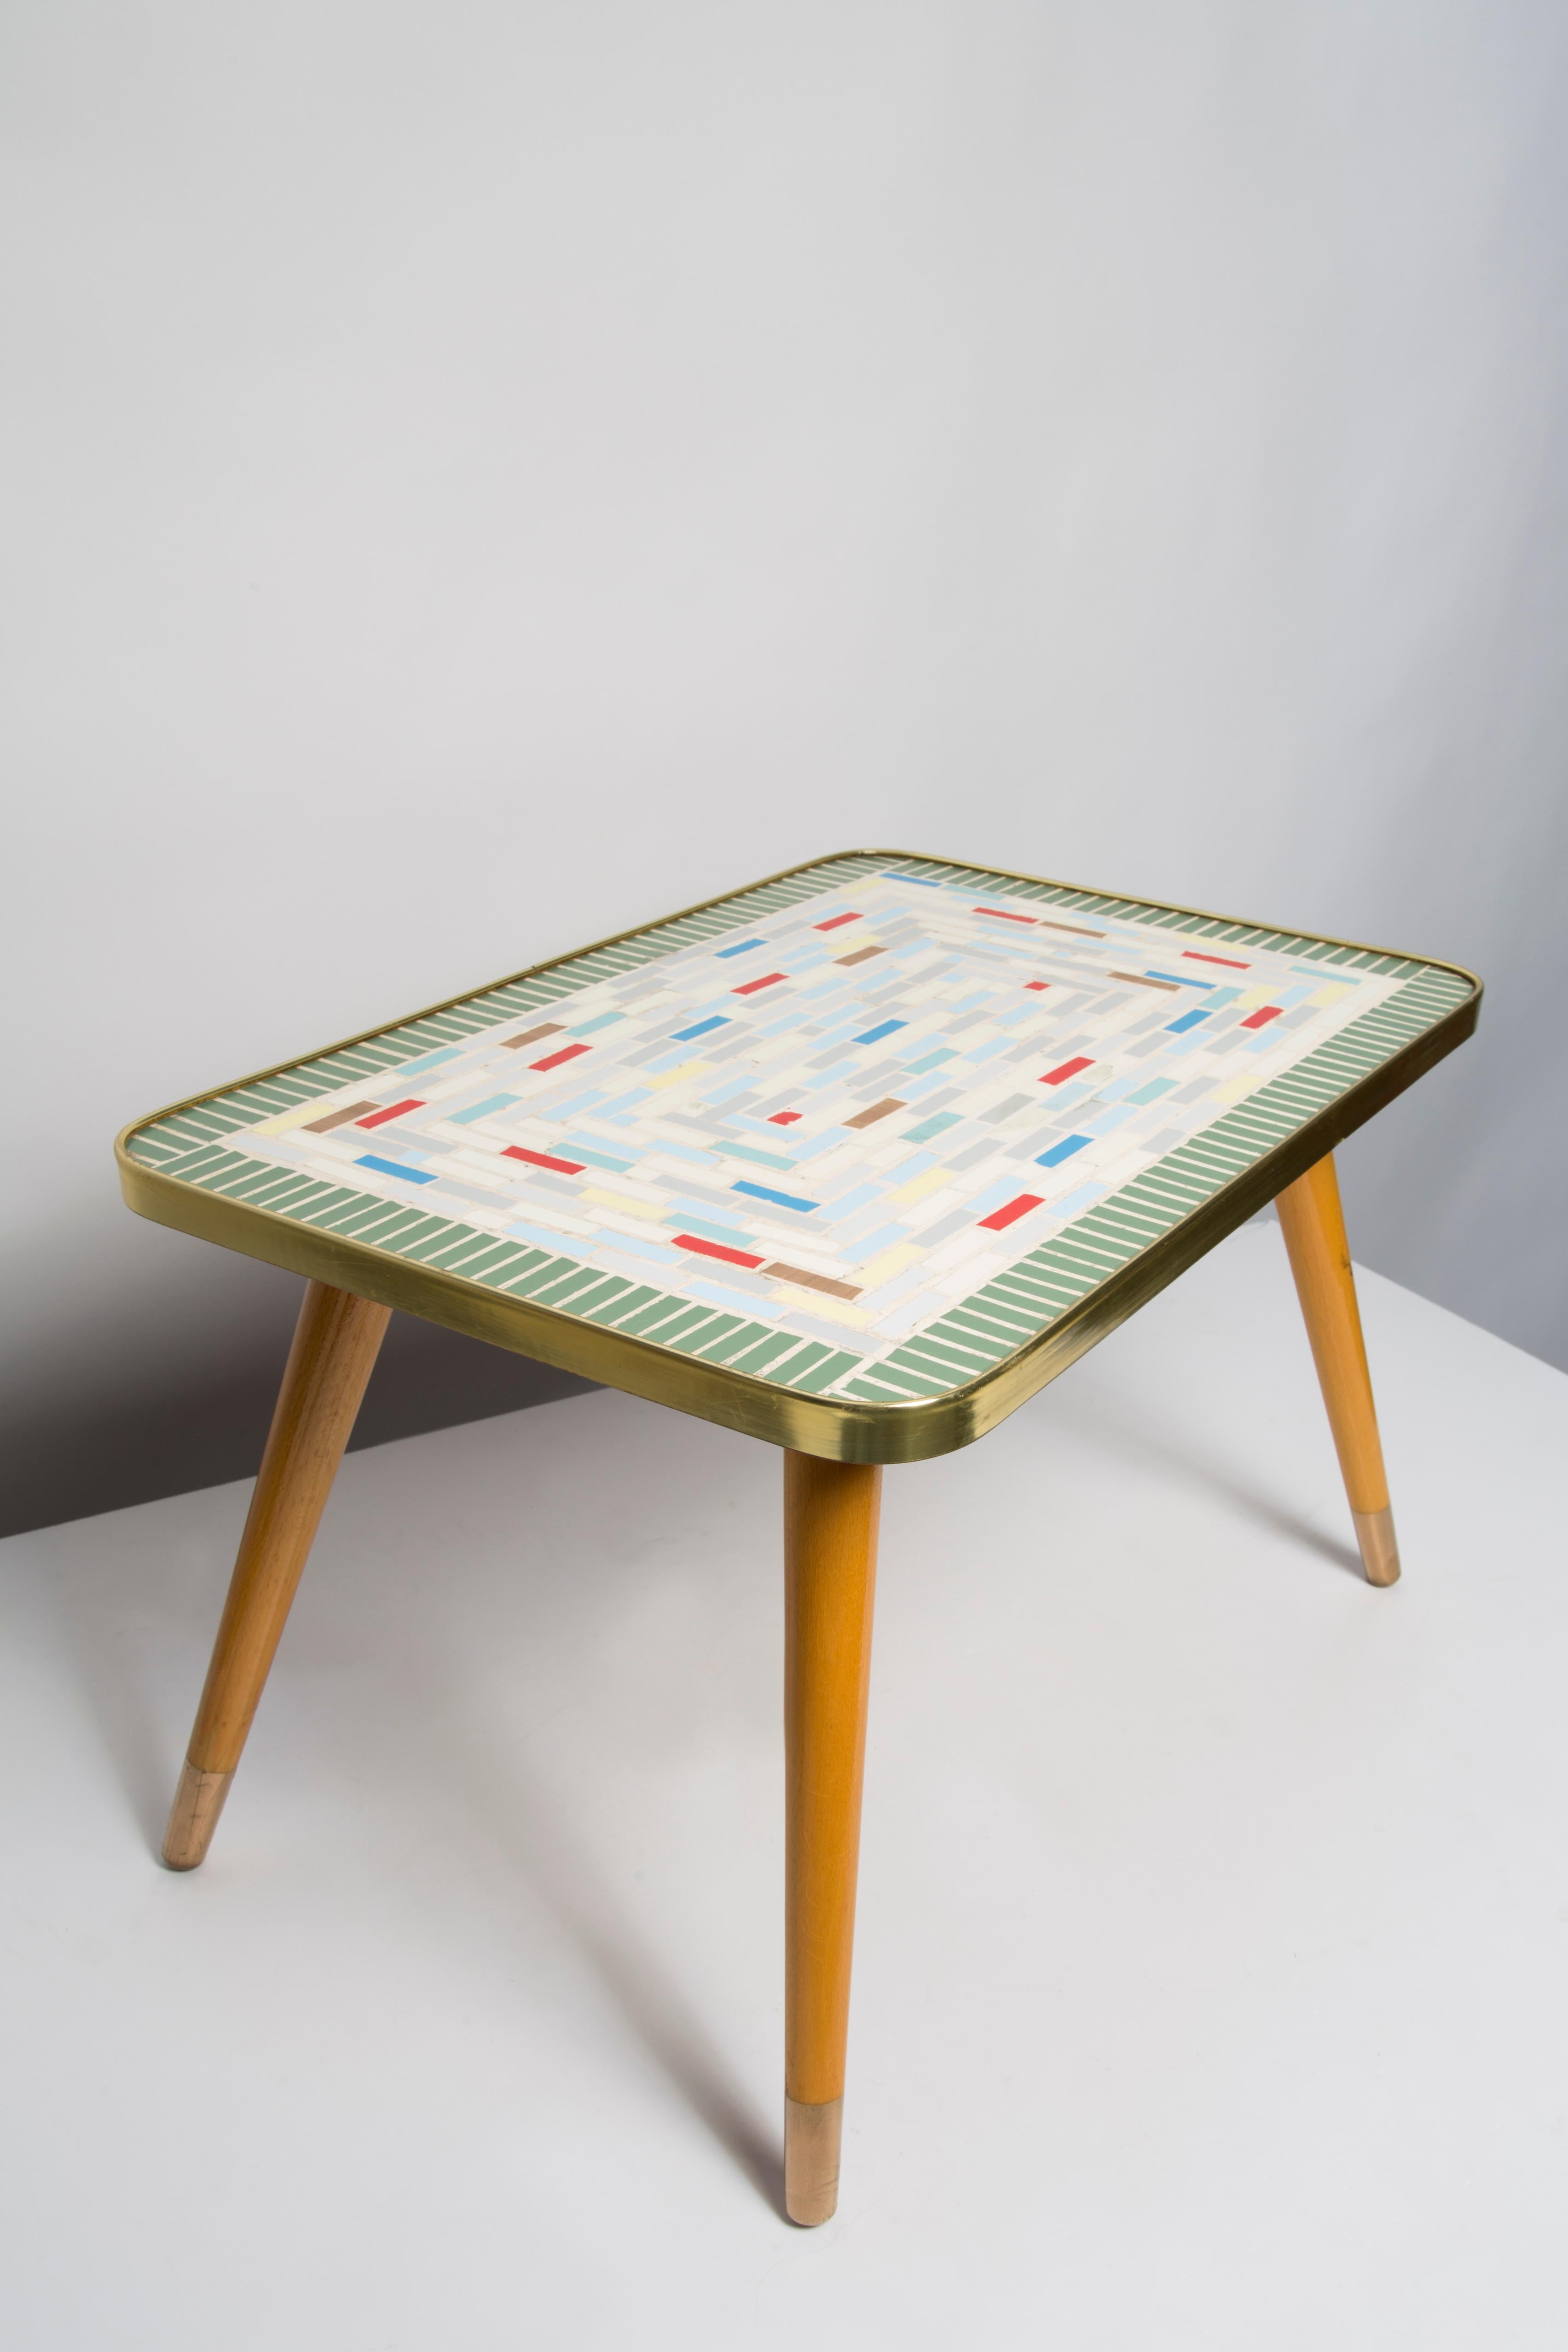 20th Century MidCentury Unique Flowerbed Pedestal, Ceramic Mosaic, Side Table, Germany, 1970s For Sale